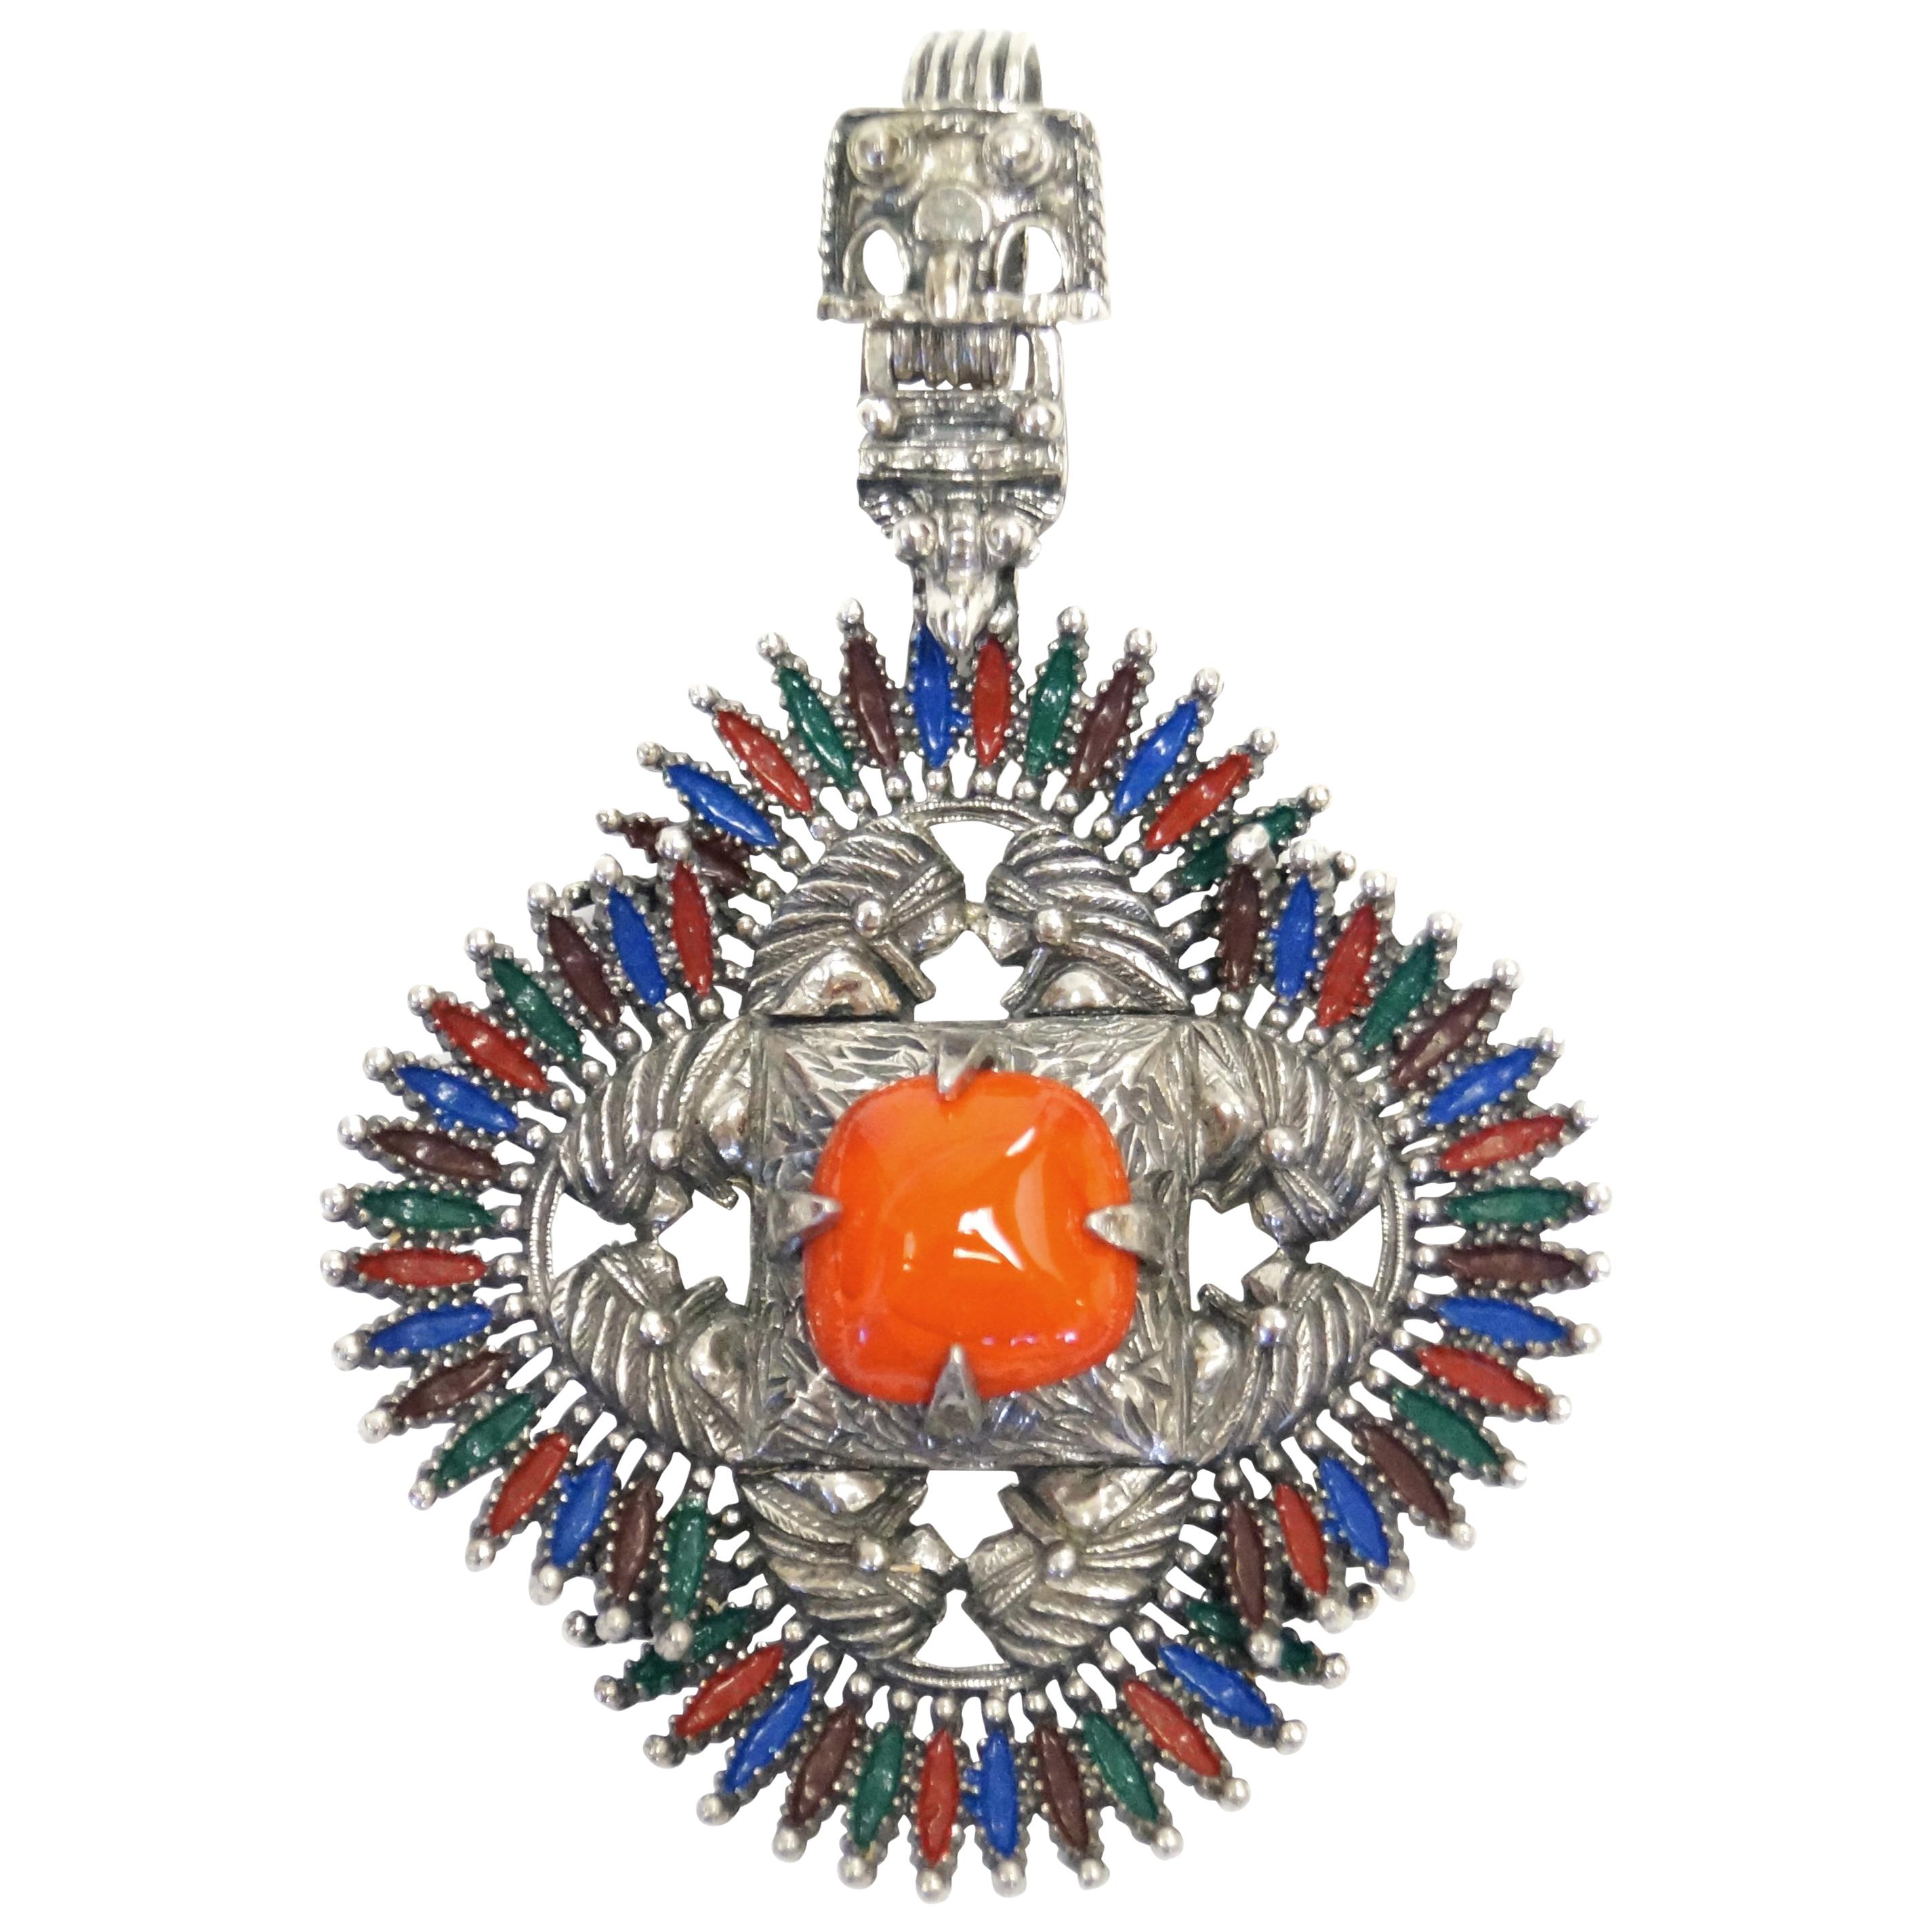 Iconic 1970s VRBA Castlecliff Necklace Pendant For Sale